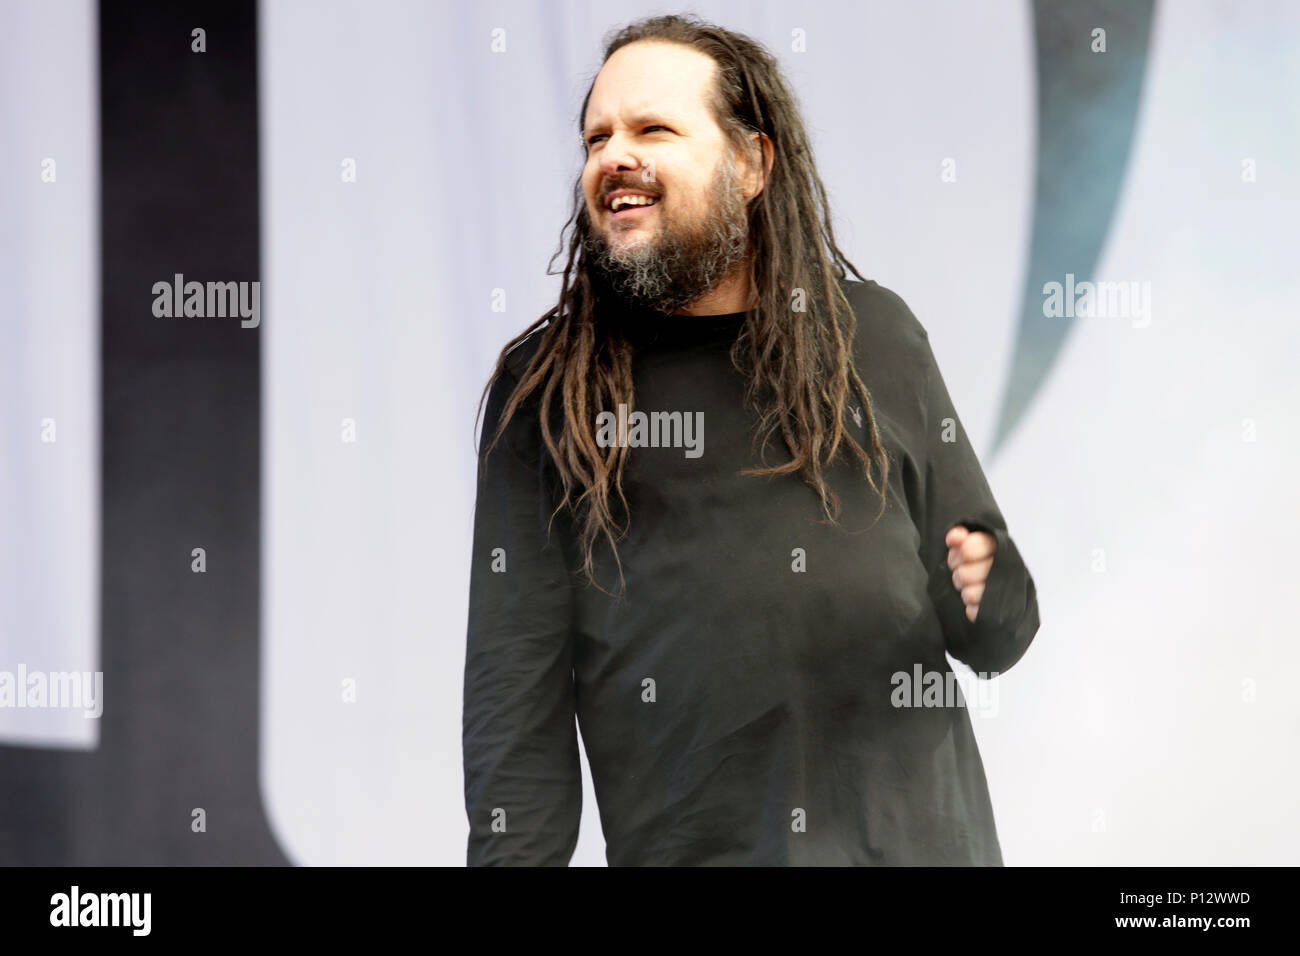 Jonathan Davis Of Korn Performs On Stage At Download Festival 18 At Donington Park Derby On 8th June 18 Stock Photo Alamy